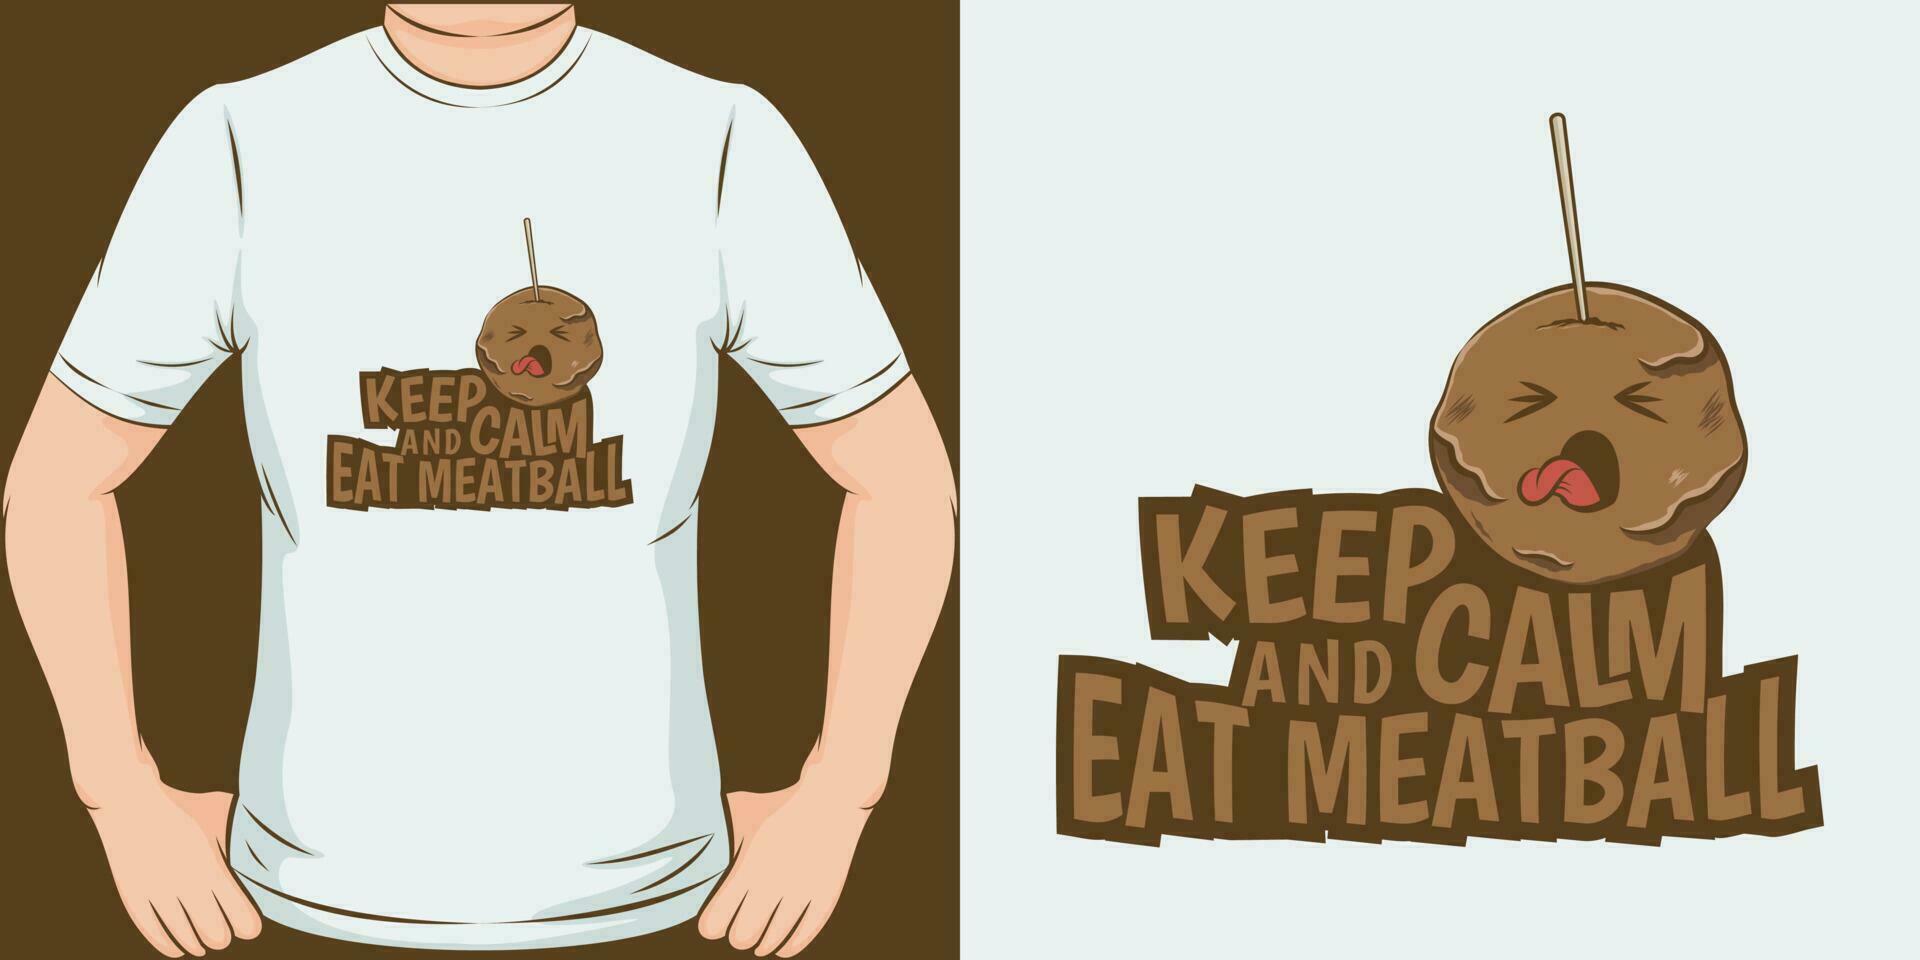 Keep Calm and Eat Meatball, Funny Quote T-Shirt Design. vector